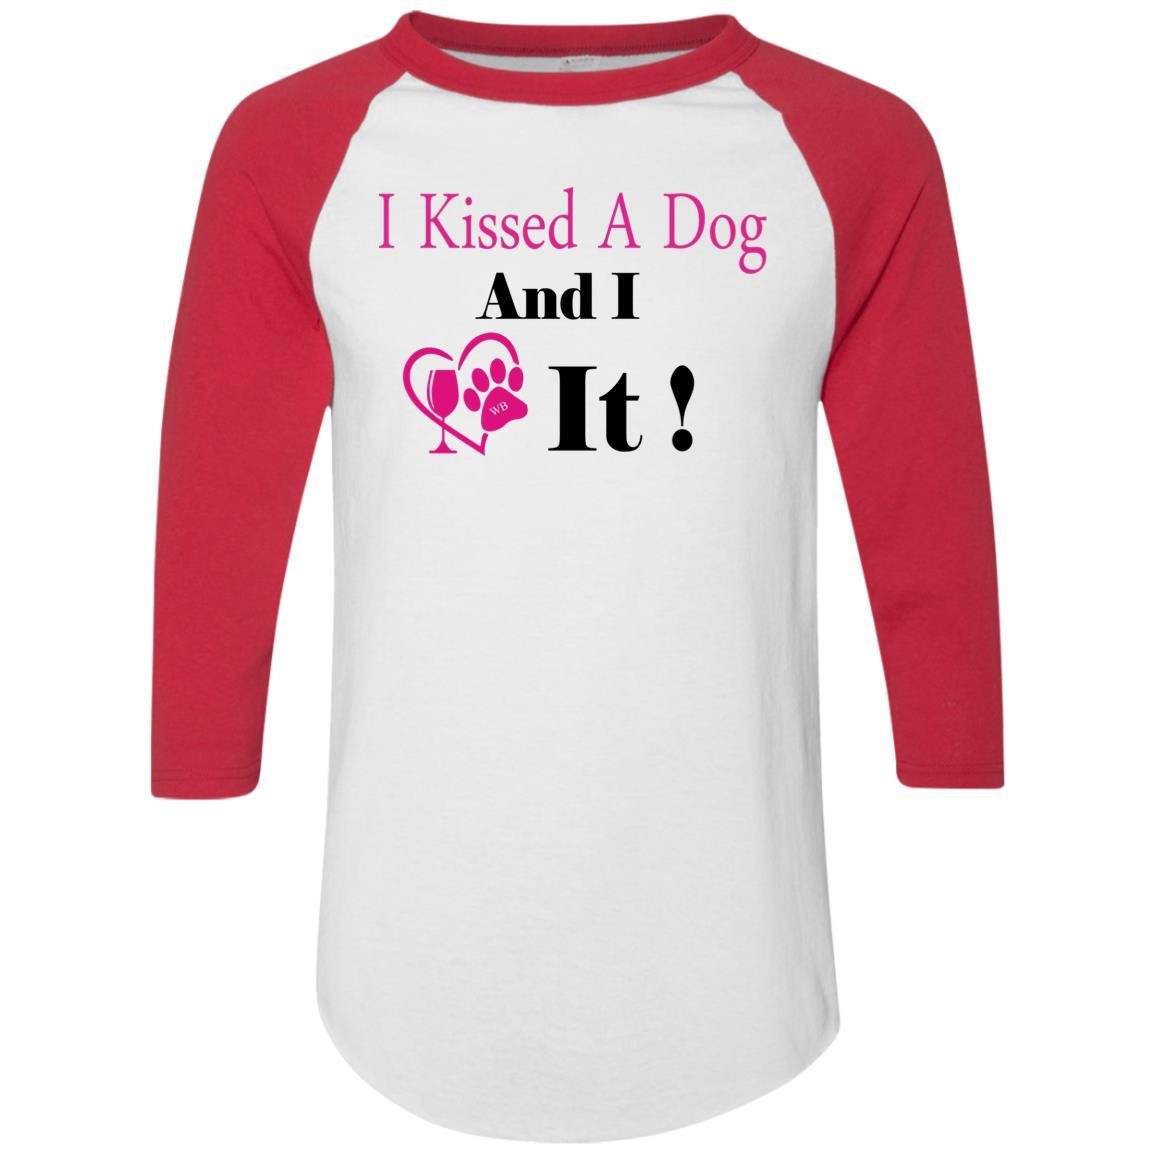 T-Shirts White/Red / S WineyBitches.co "I Kissed A Dog And I Loved It:" Colorblock Raglan Jersey WineyBitchesCo